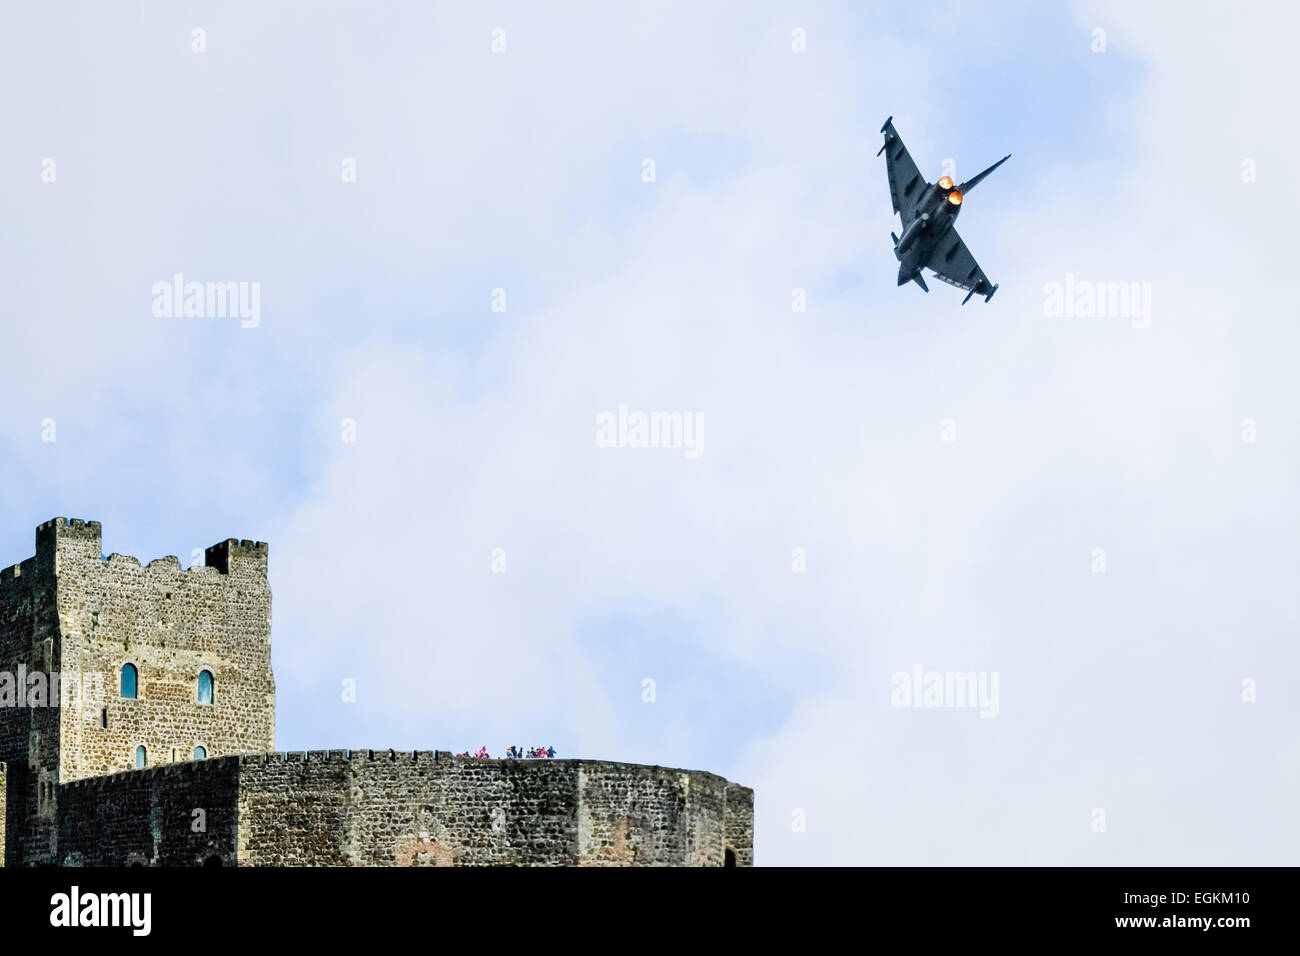 Eurojet Typhoon fighter aircraft over Carrick Castle, Armed Forces Day, 2013 Stock Photo